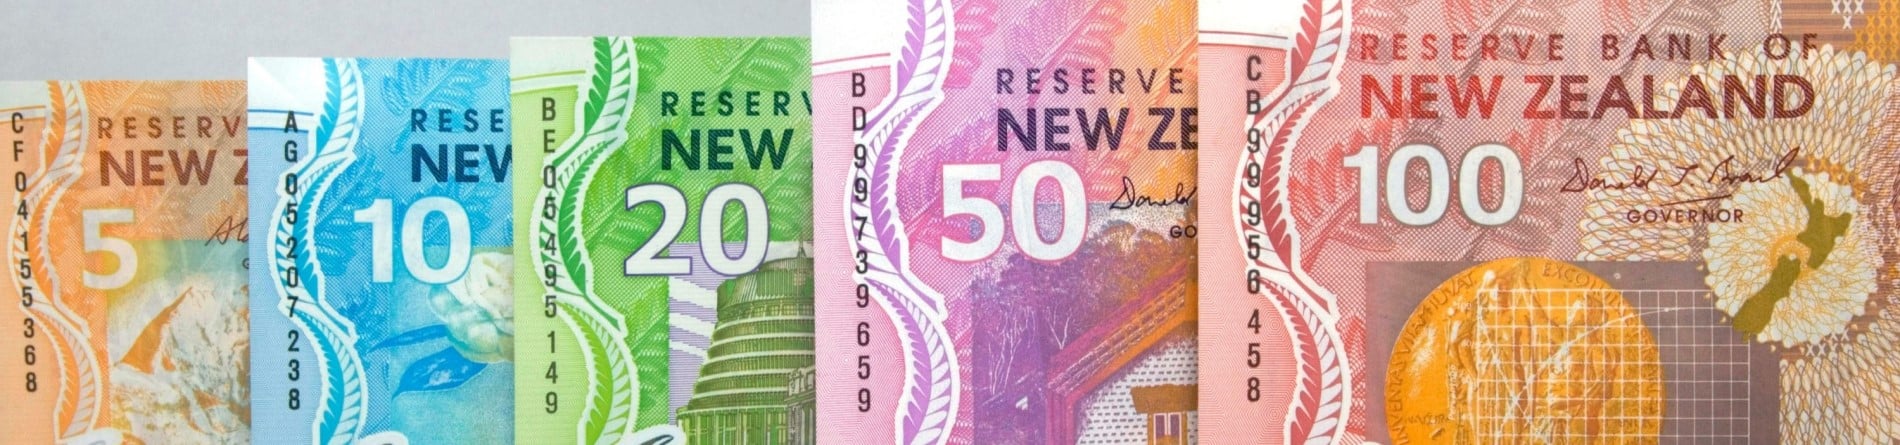 New Zealand dollars 1900x445 - Lighting Controls Technology - The Cost of Getting It Wrong